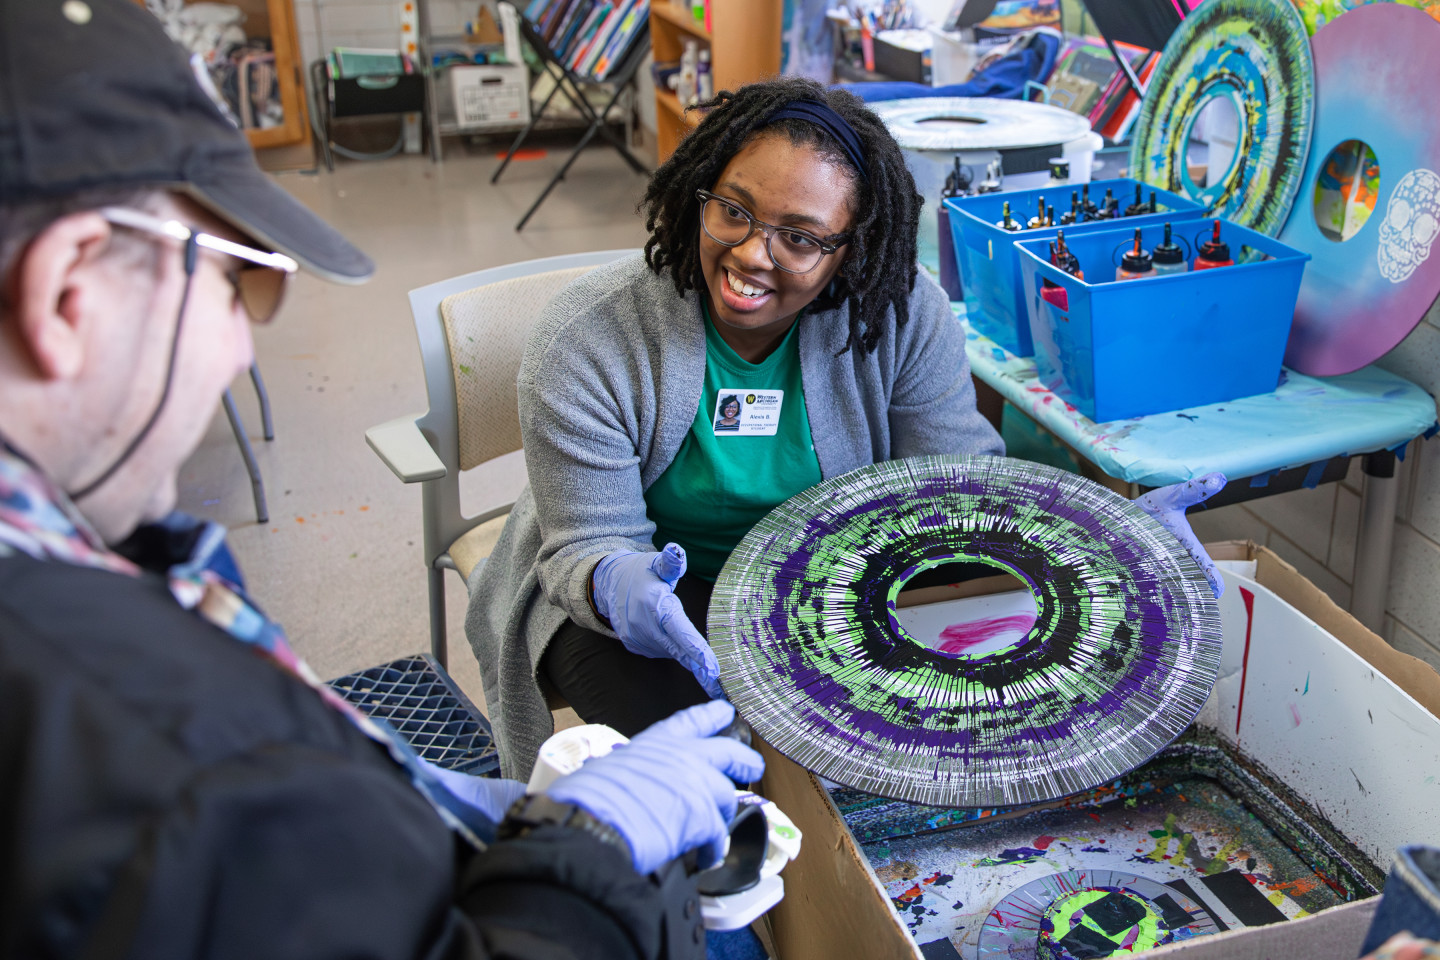 Occupational therapy doctoral student Alexis Bailey works on a project with participants from the Center for Disability Services 